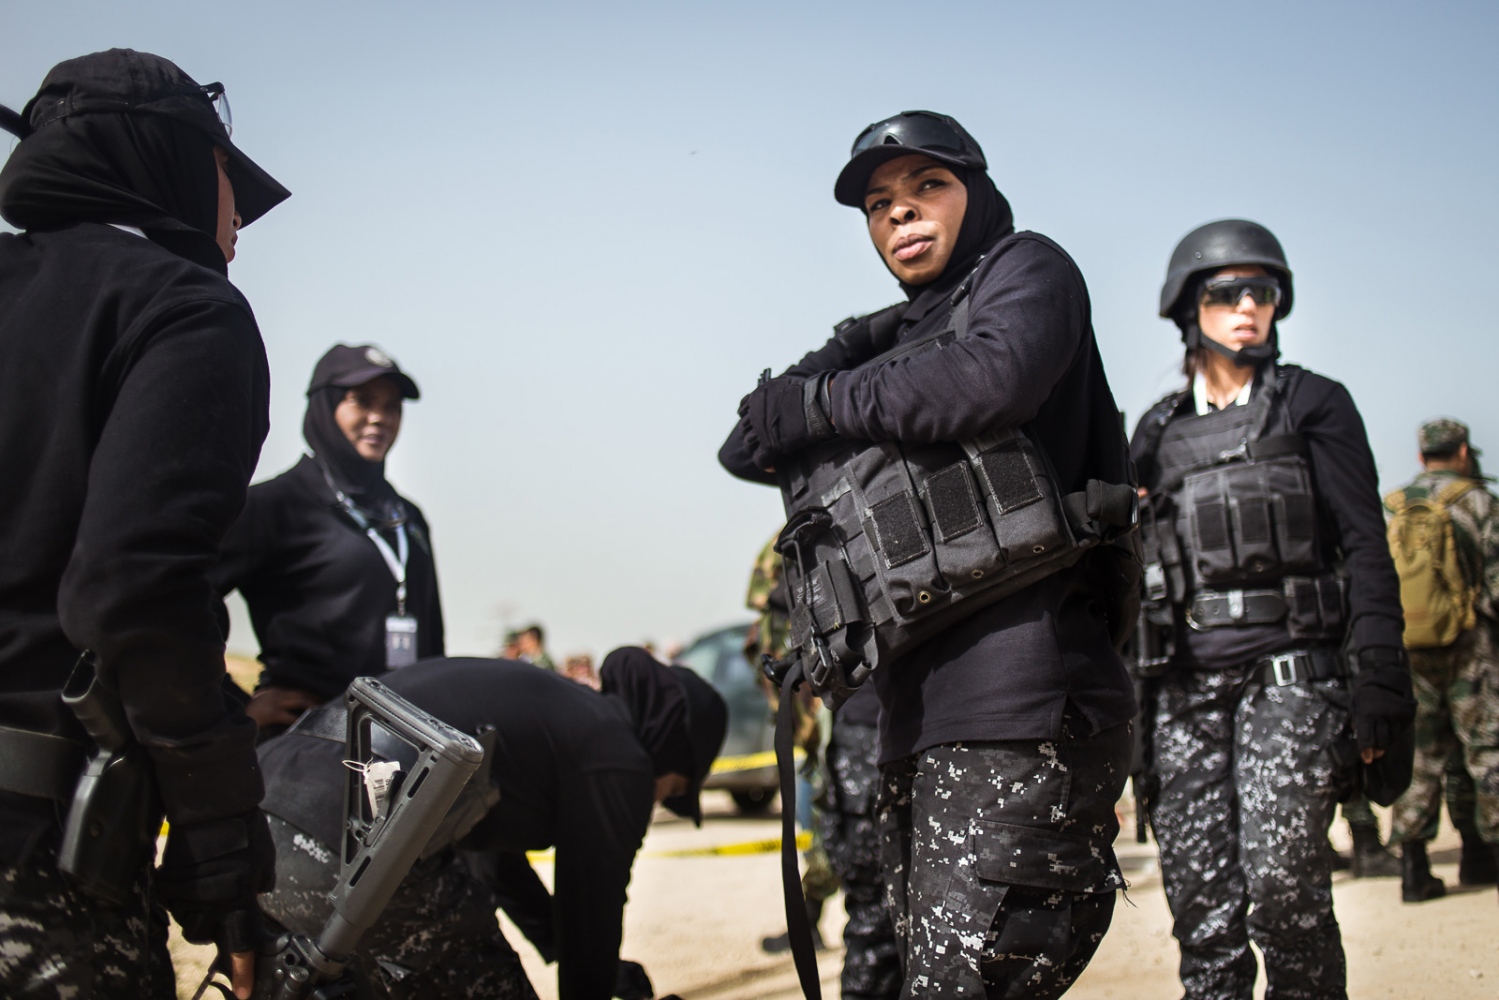  The all-women's Unit 30 SWAT Police team from Jordan competes in the three-gun gauntlet during the seventh annual Warrior Competition at the King Abdullah II Special Operations Training Center near Amman, Jordan, on April 20, 2015. 